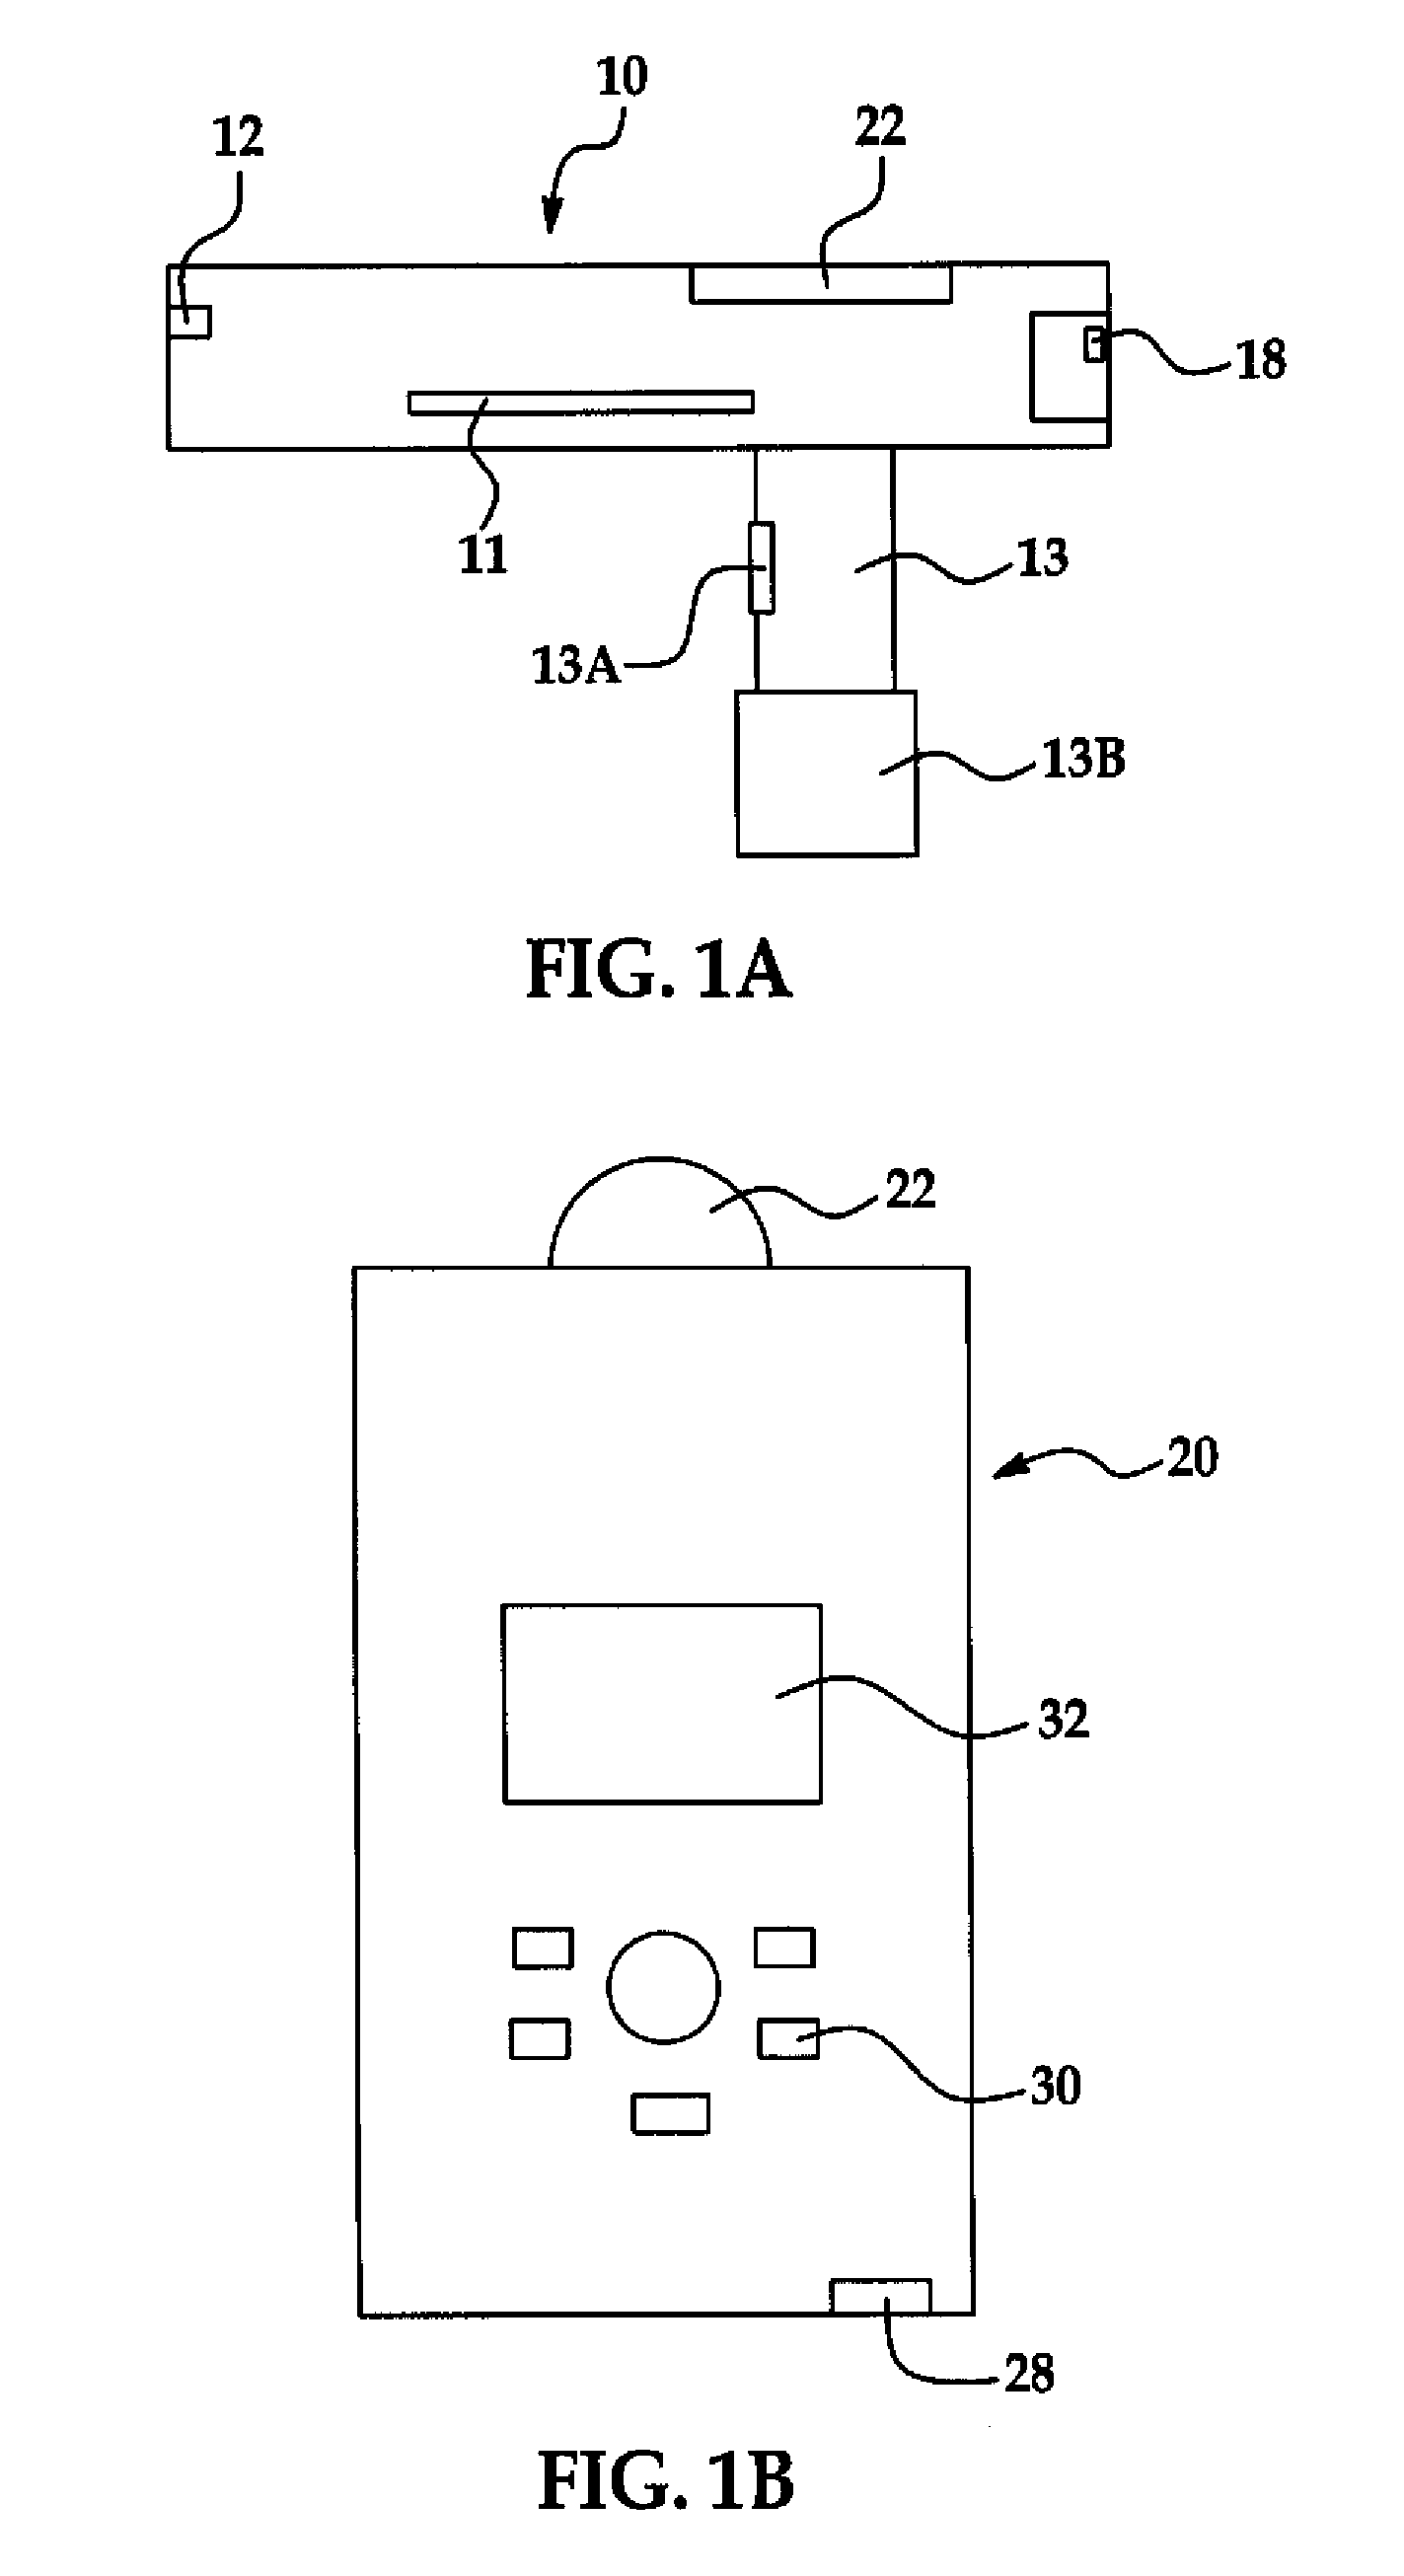 Method for determining degree of aging of a polymer resin material